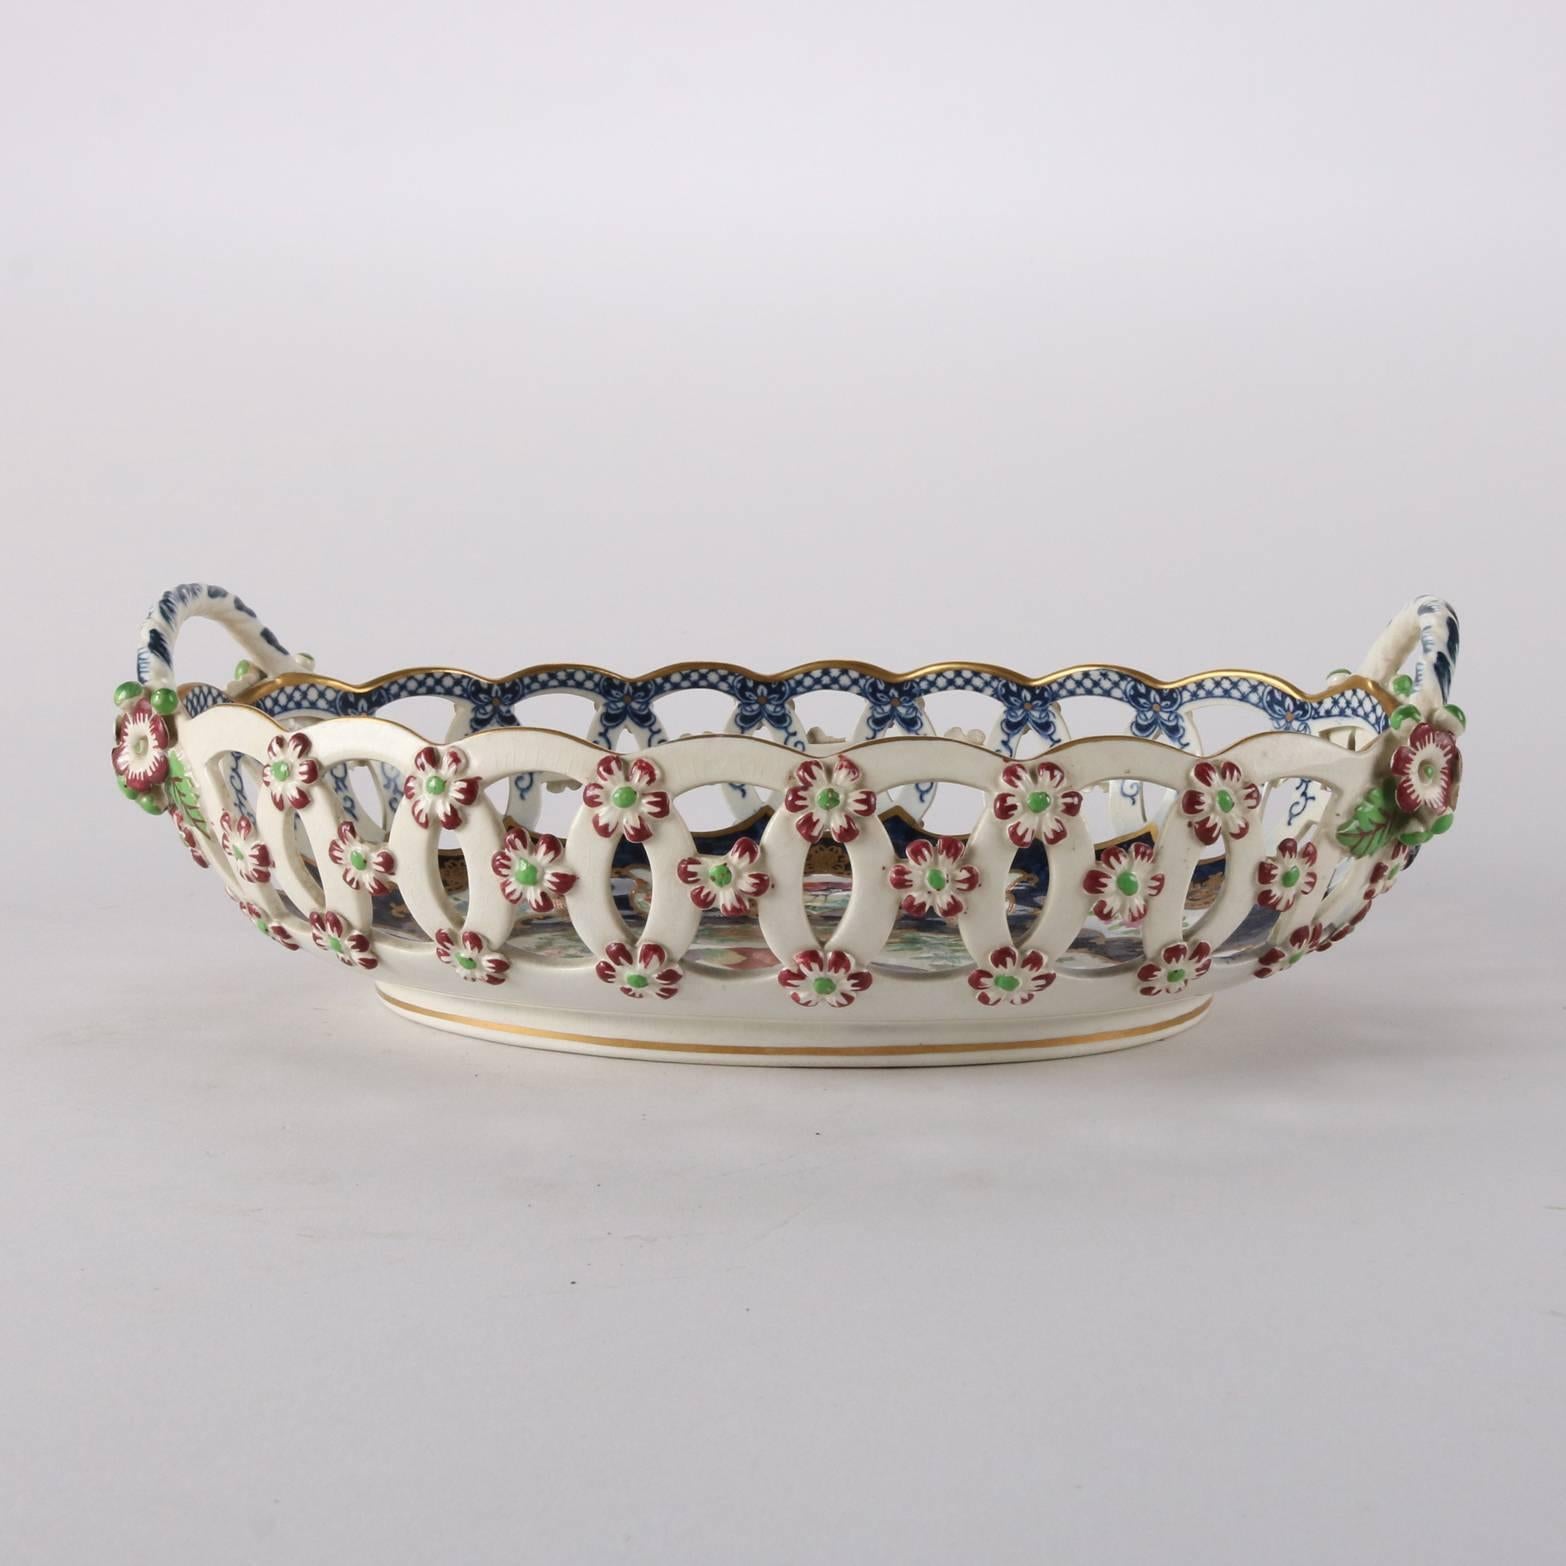 English Booths Hand-Painted Porcelain Reticulated Bread Bowl, 19th Century 4